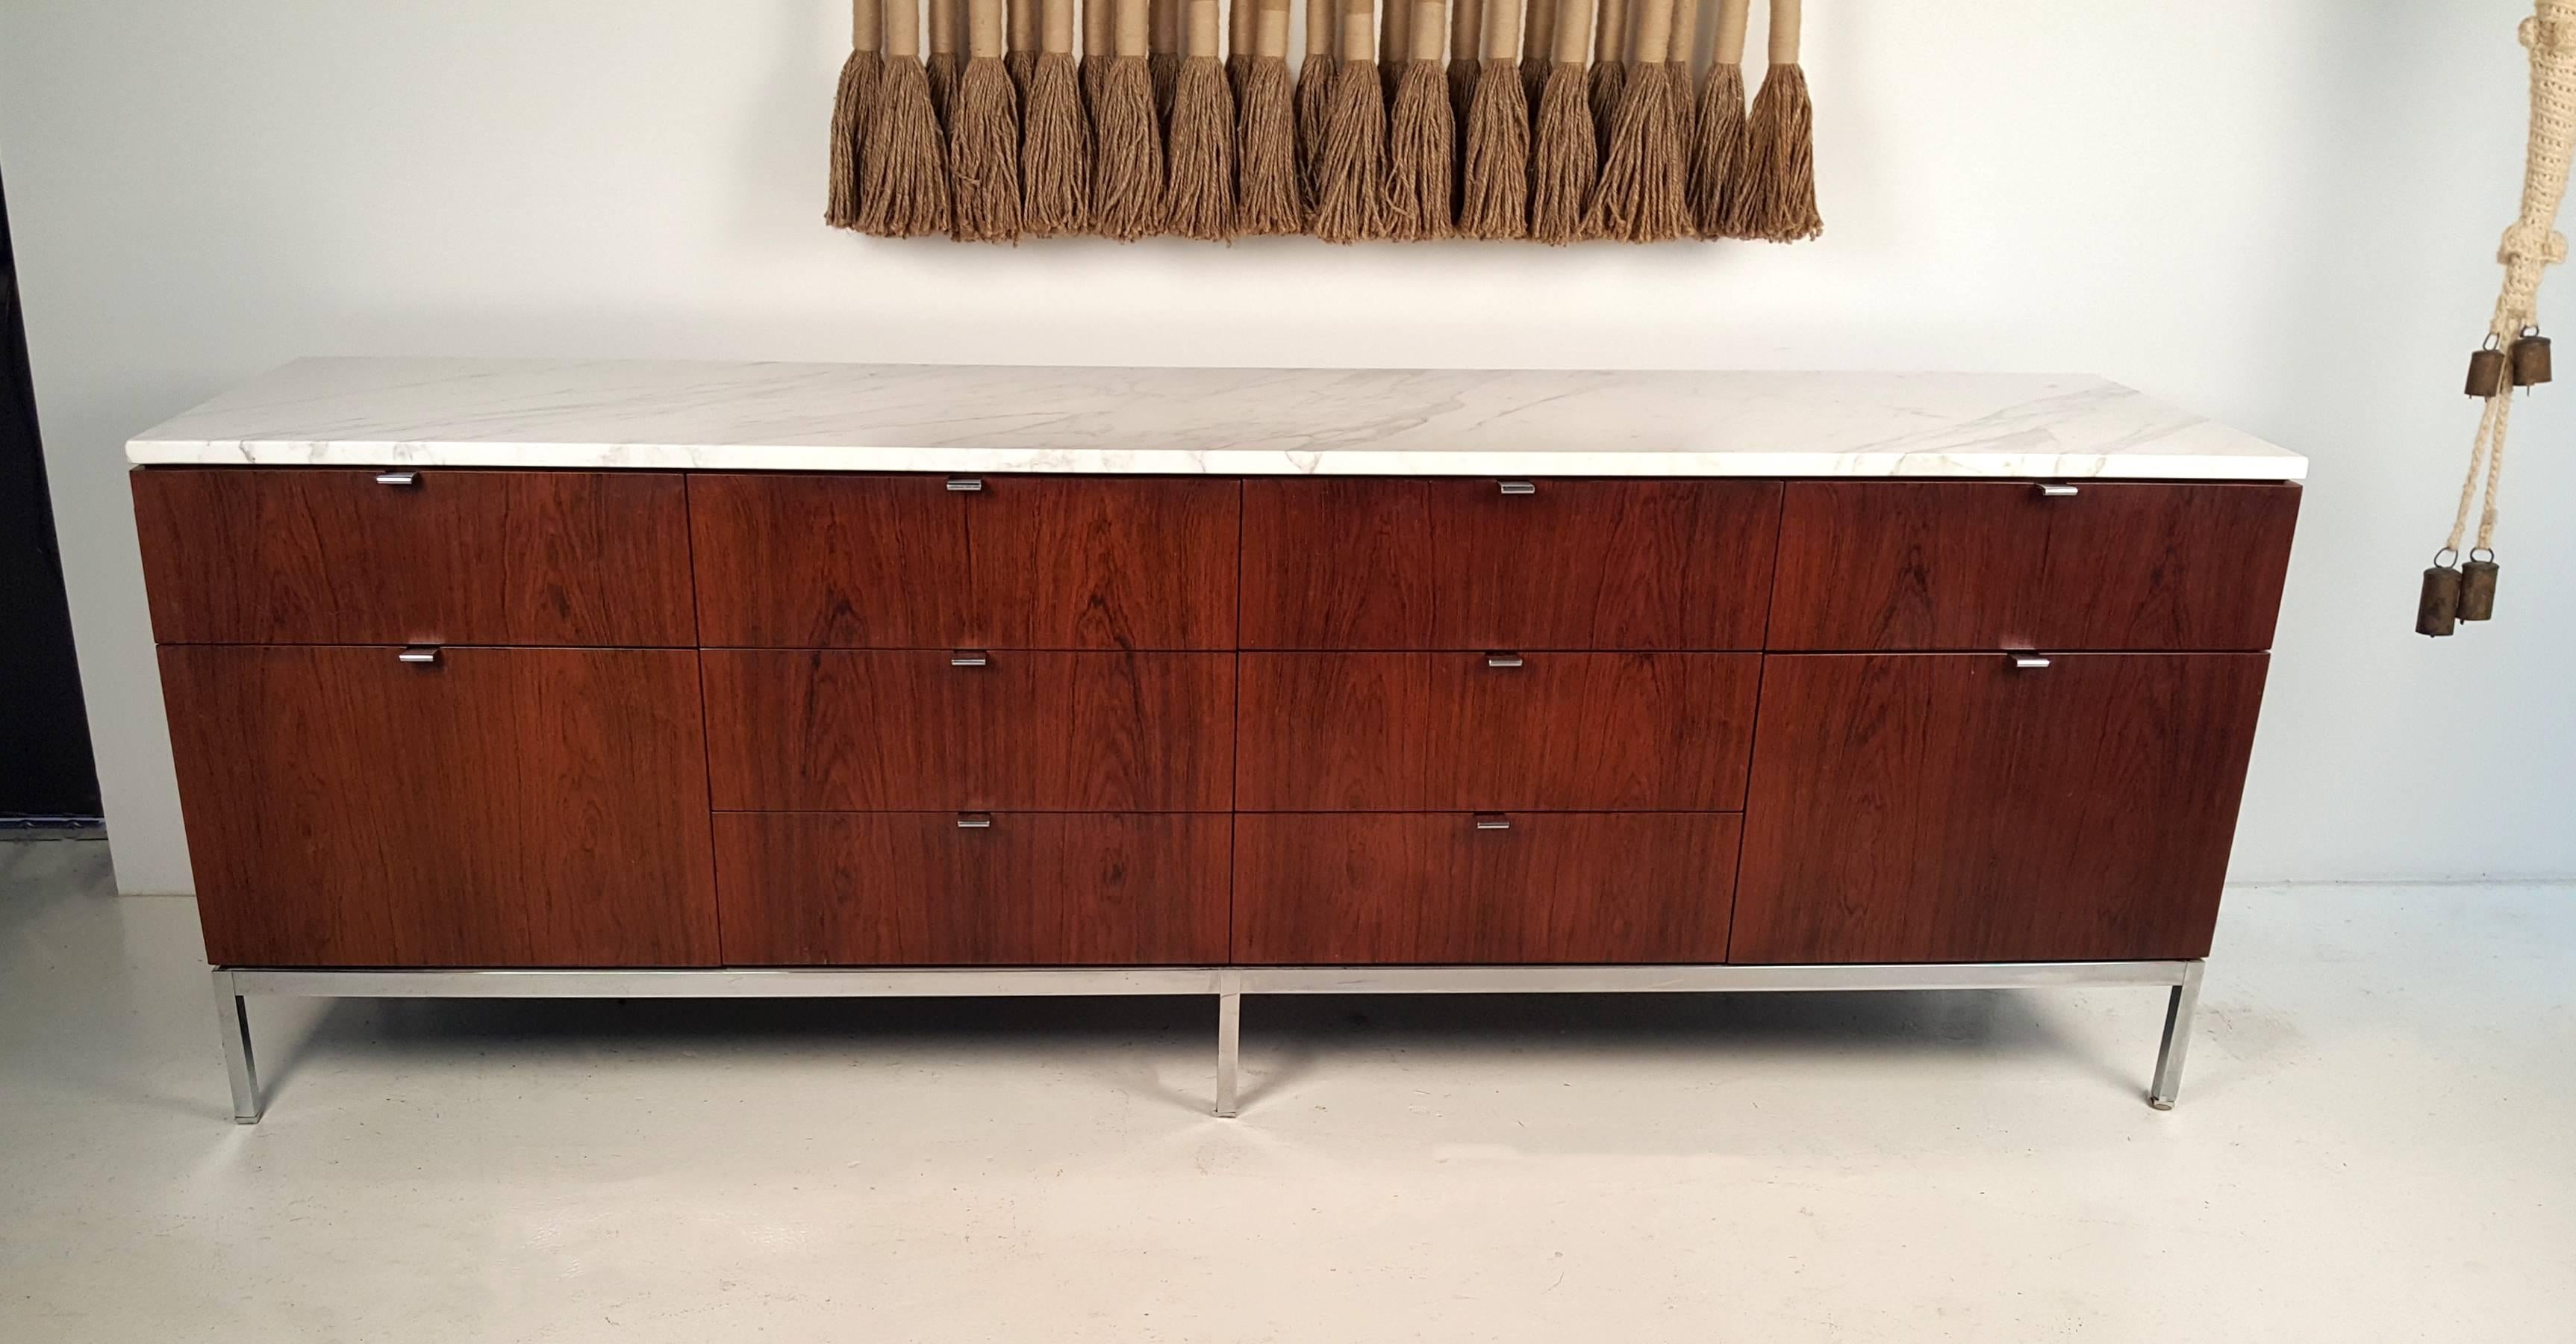 Ten-drawer Brazilian rosewood credenza with Carrara marble top designed by Florence Knoll for Knoll International. Chrome-plated base and hardware and oak interiors. Very good original condition.